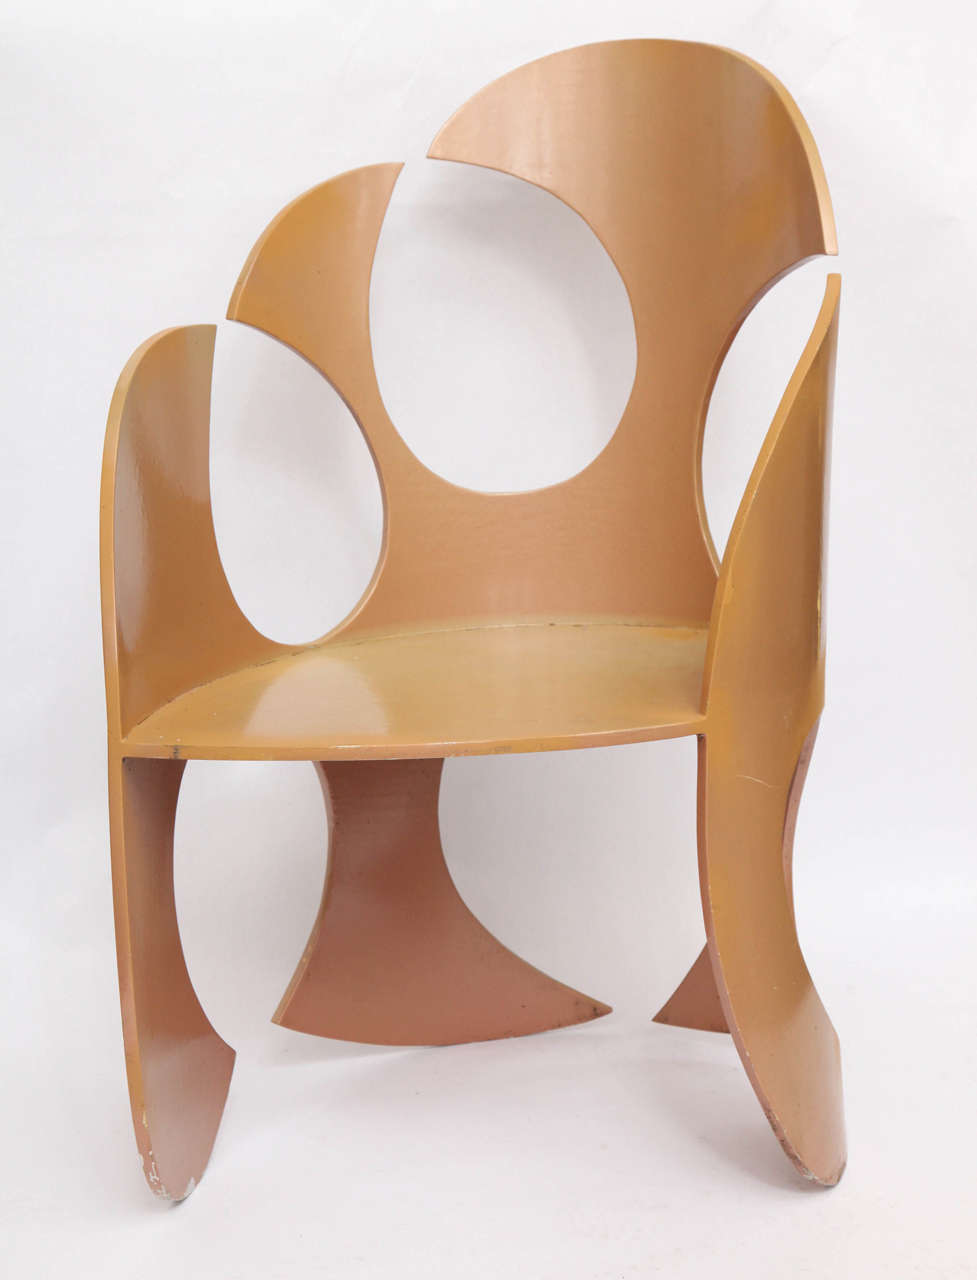 A 1980s sculptural chair crafted of painted metal.